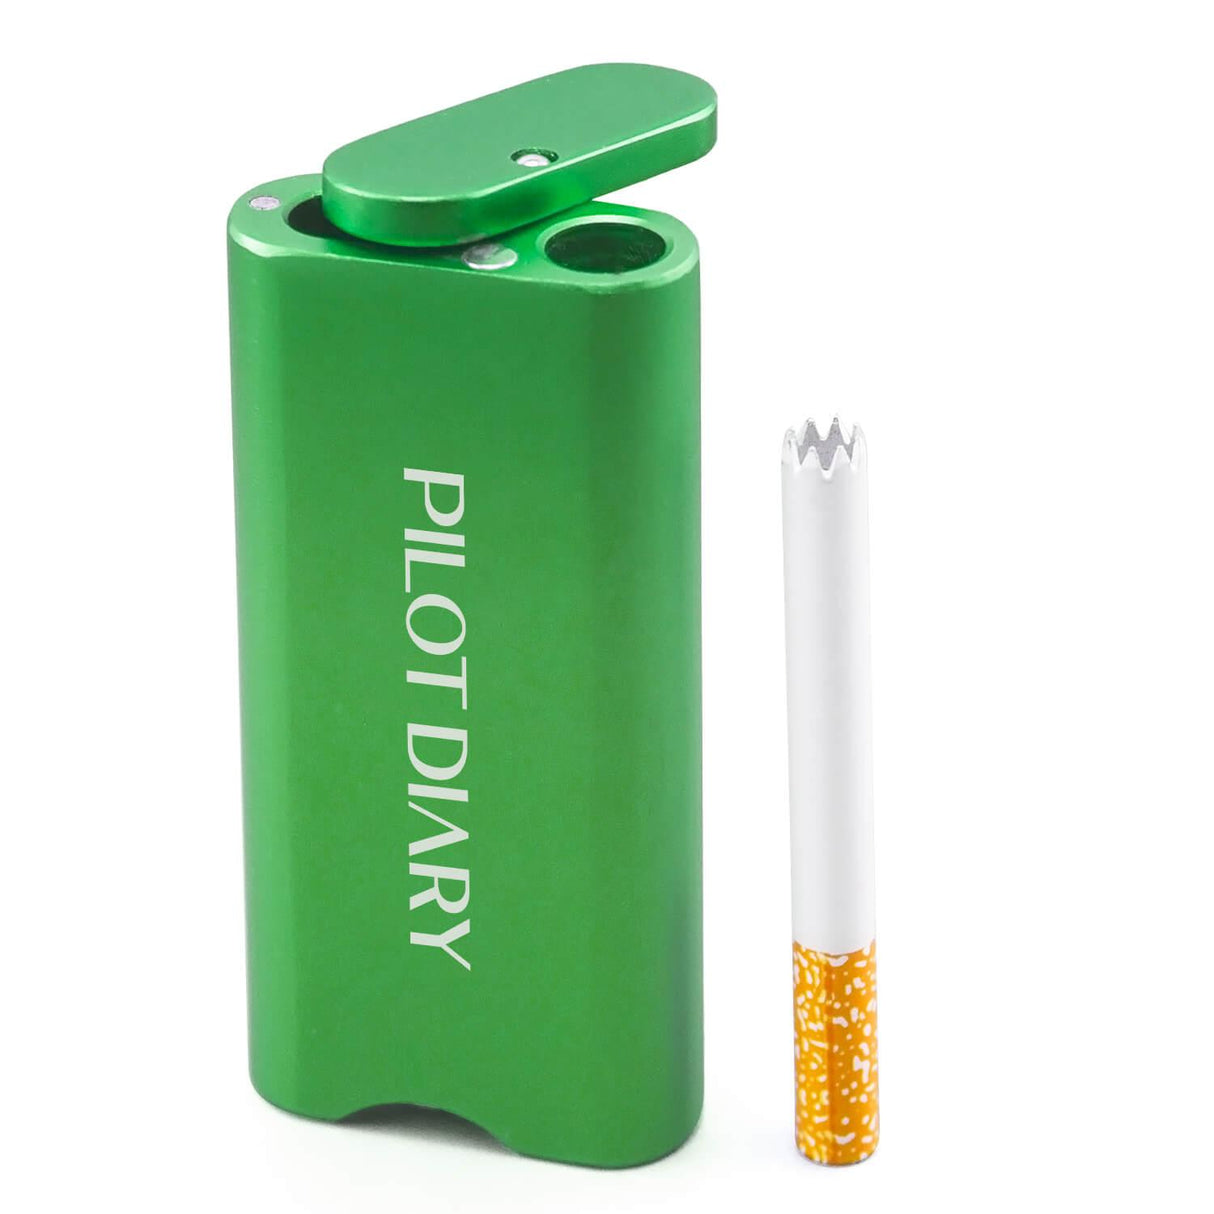 PILOT DIARY Metal Dugout One Hitter in Green with White Bat - Front View